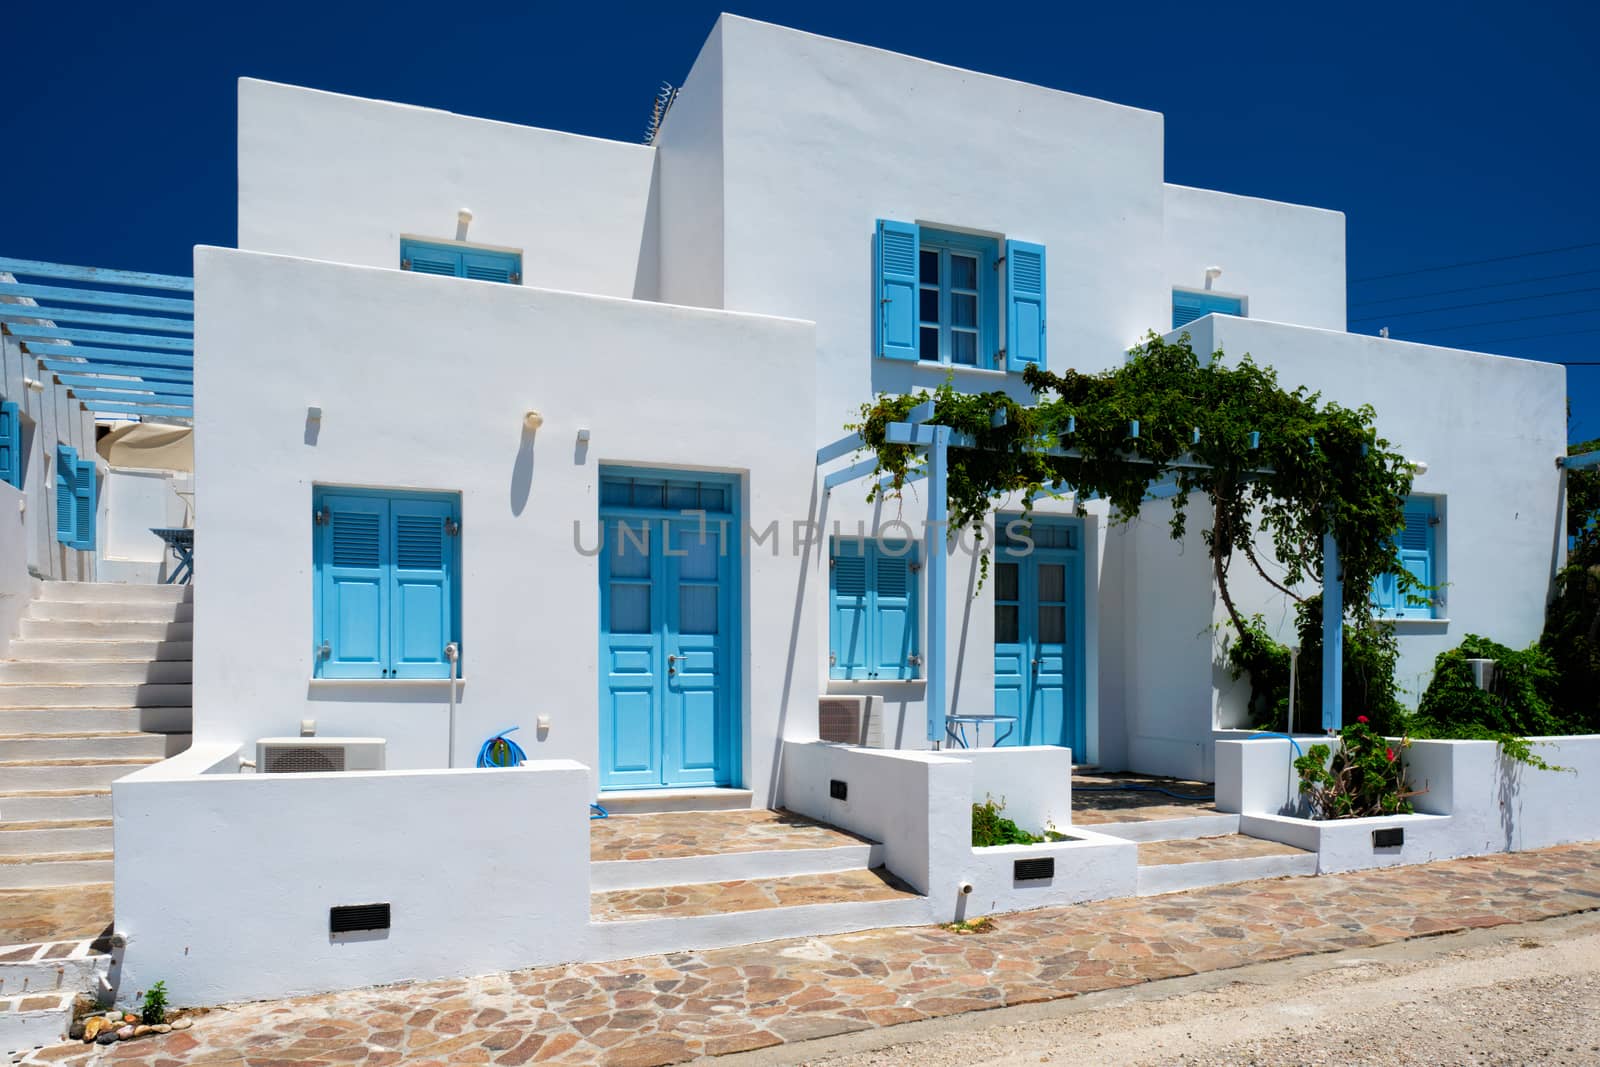 Traditional greek architecture - houses painted white with blue doors and window shutters. Pachena village, Milos island, Greece